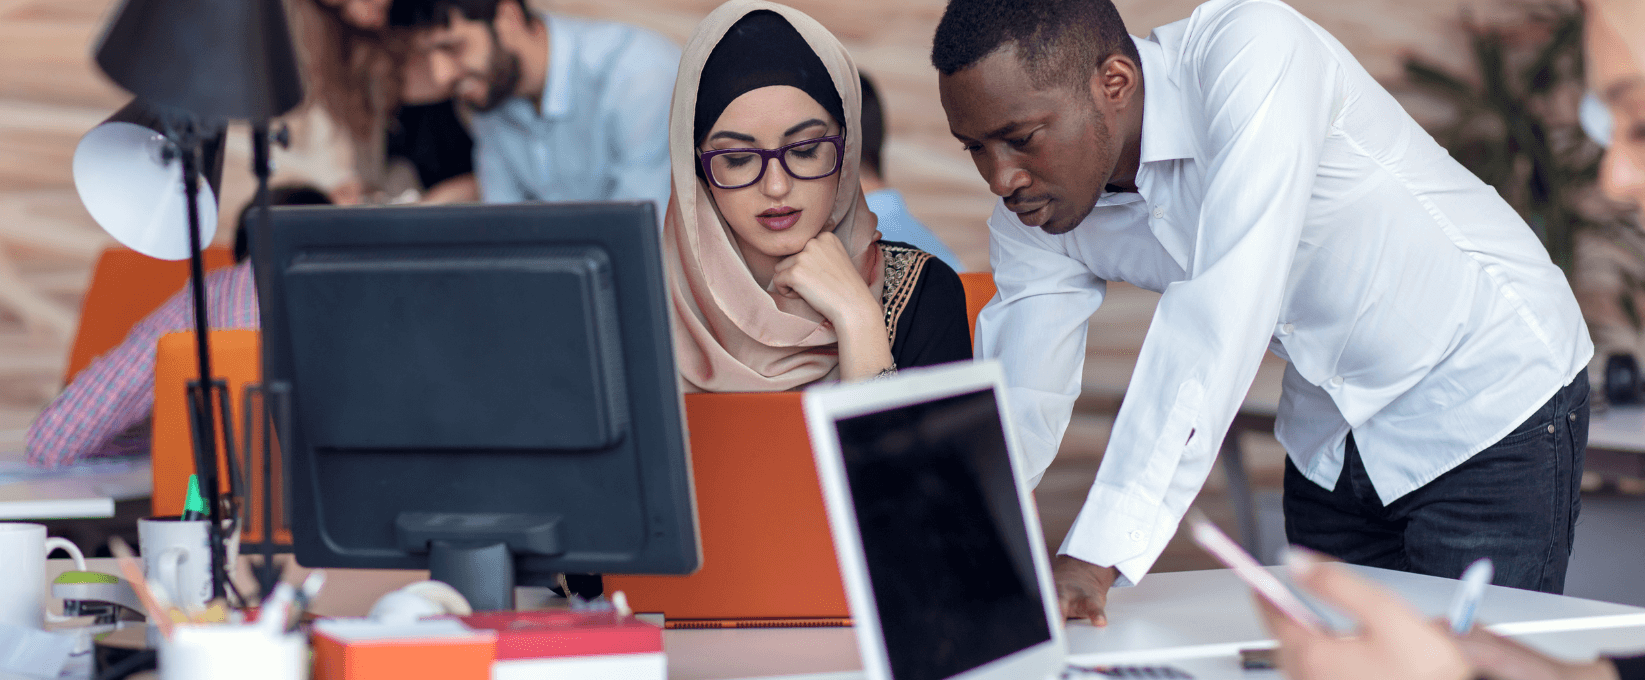 A Black man and a Muslim woman working together looking at a computer.